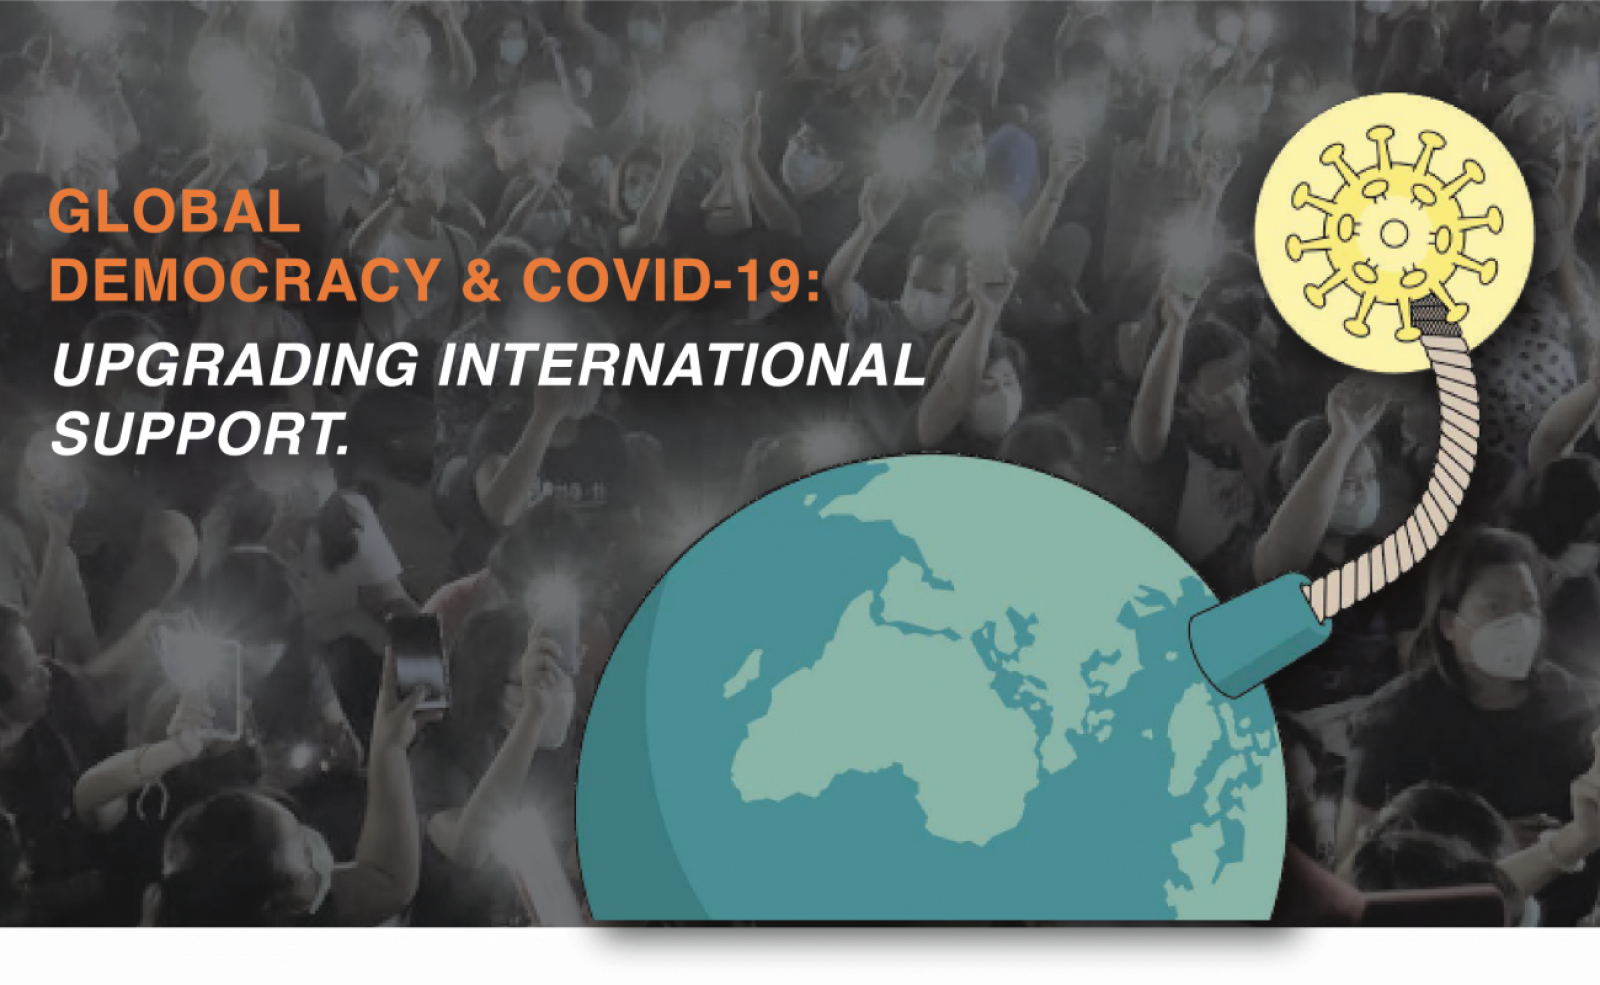 a call for governments to take urgent action to defend democracy during COVID-19 pandemic    